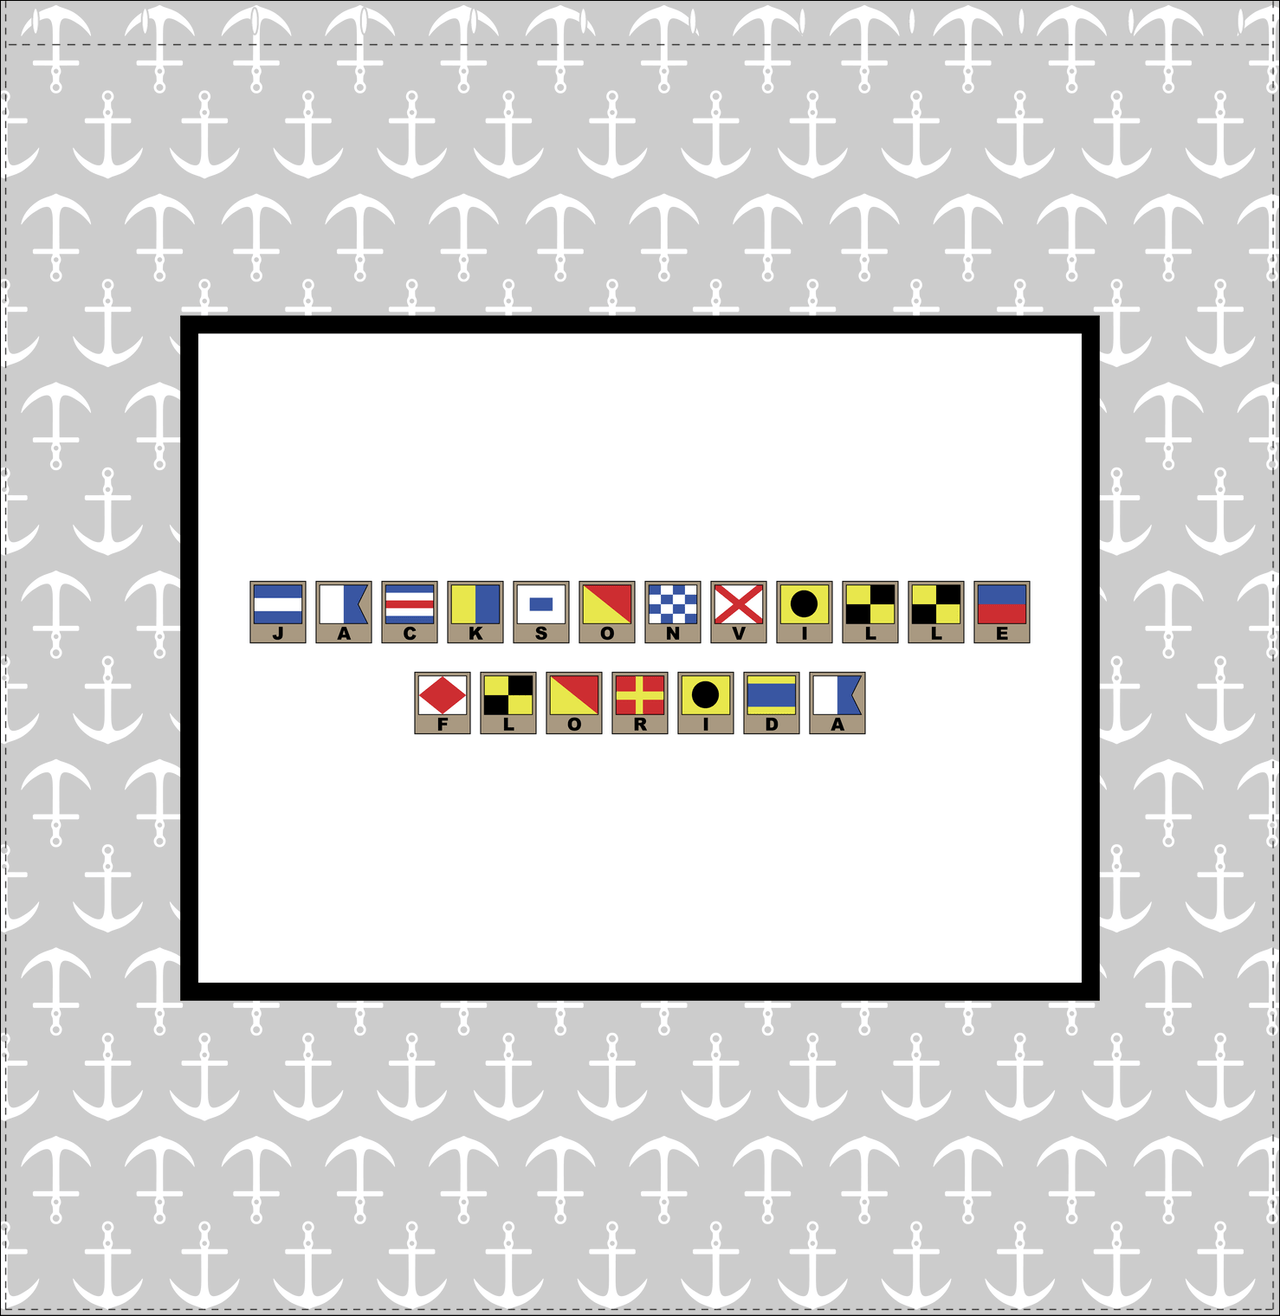 Personalized Nautical Flags Shower Curtain with Anchors - Grey and Black - Flags with Light Brown Frames - Decorate View